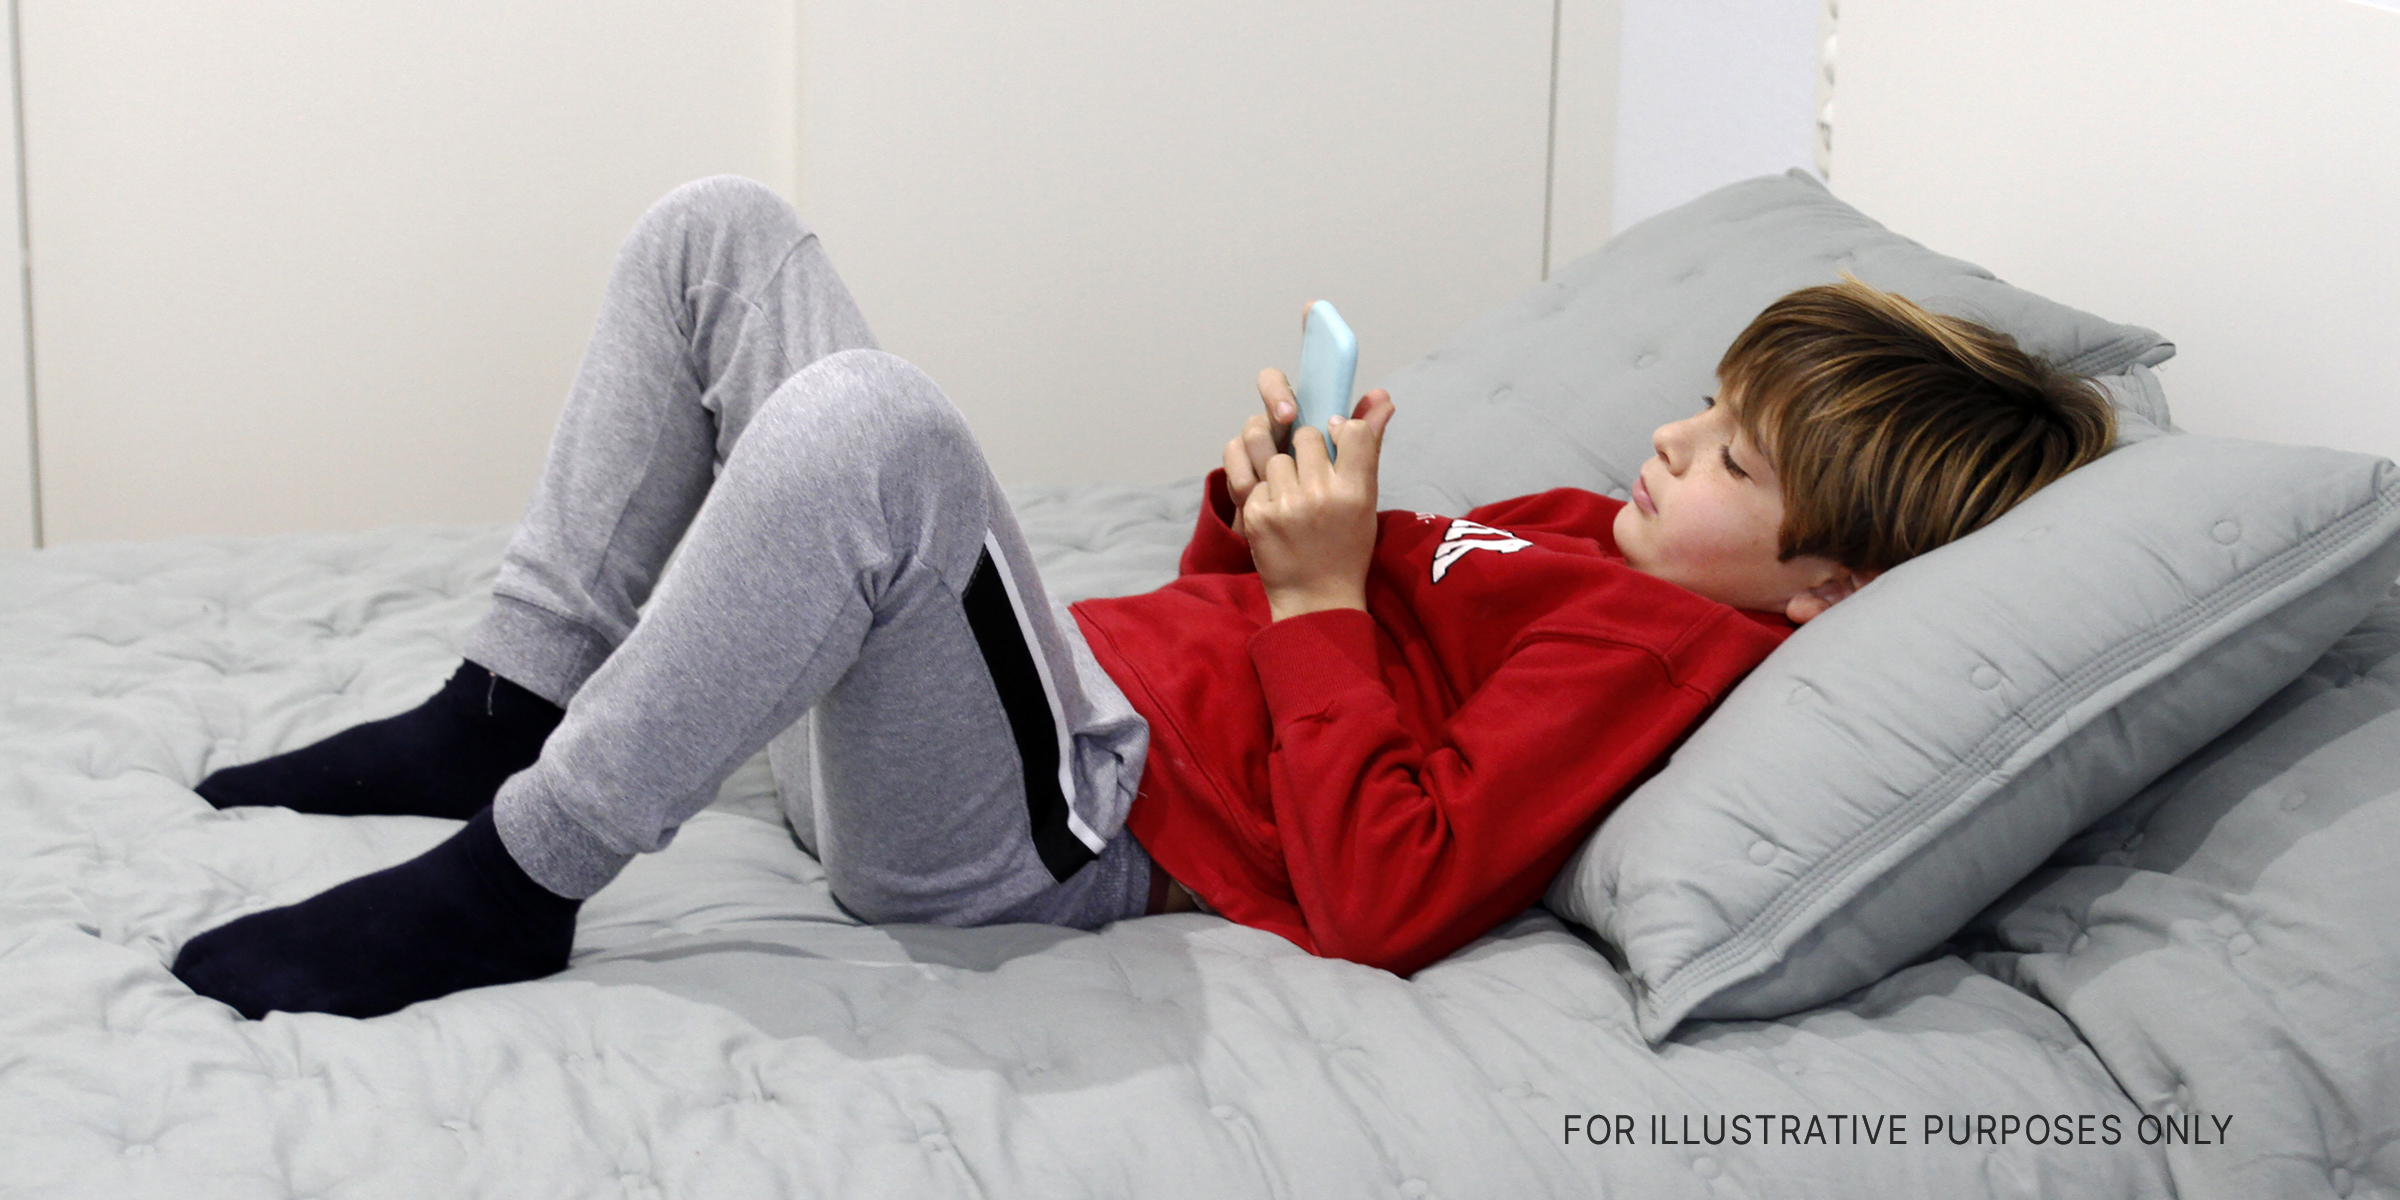 A boy using his phone on the sofa | Source: Getty Images